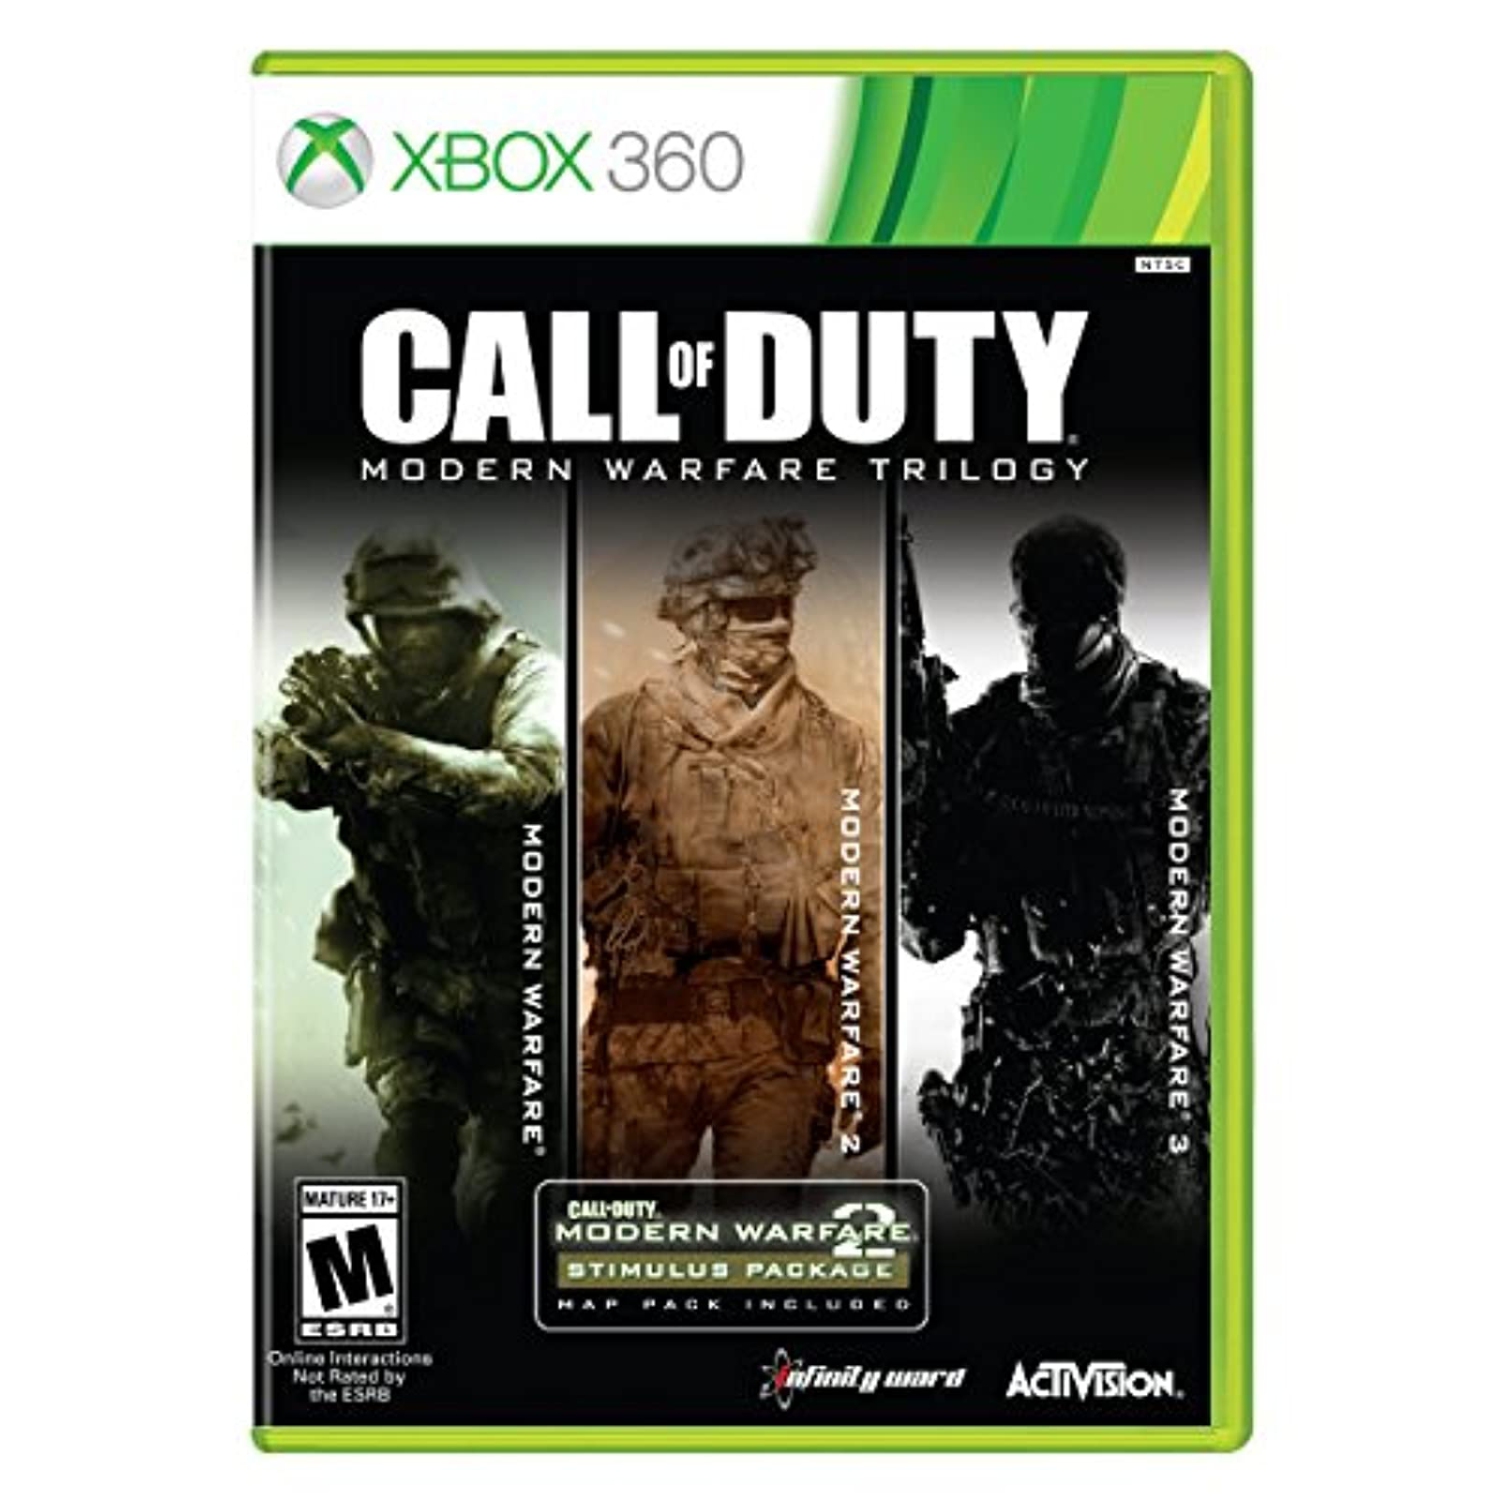 Call of Duty Modern Warfare Collection Trilogy, Activision, Xbox 360 - Previously Played